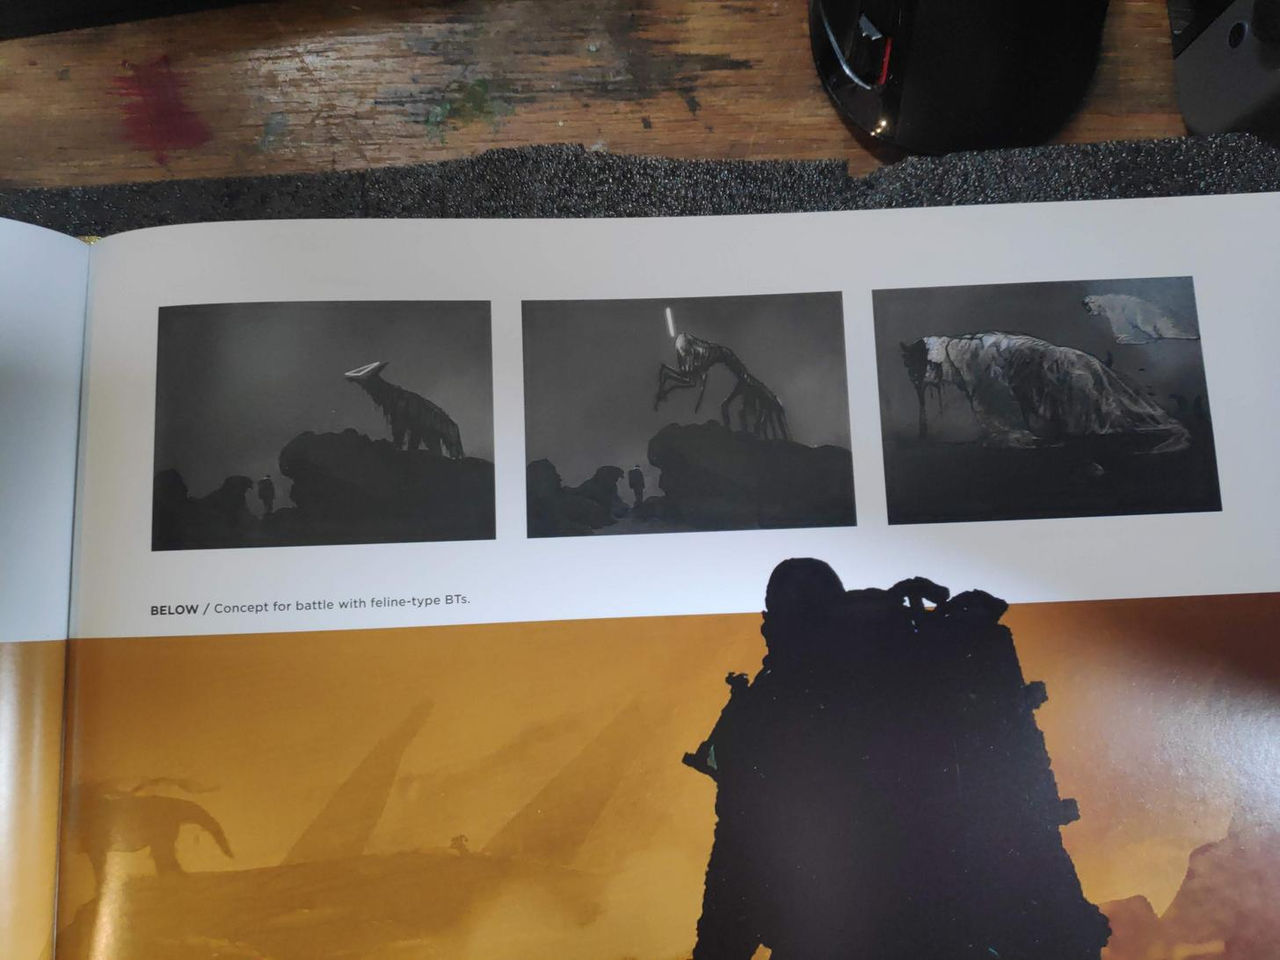 First images from the book of illustrations that explores the origin of Death Stranding